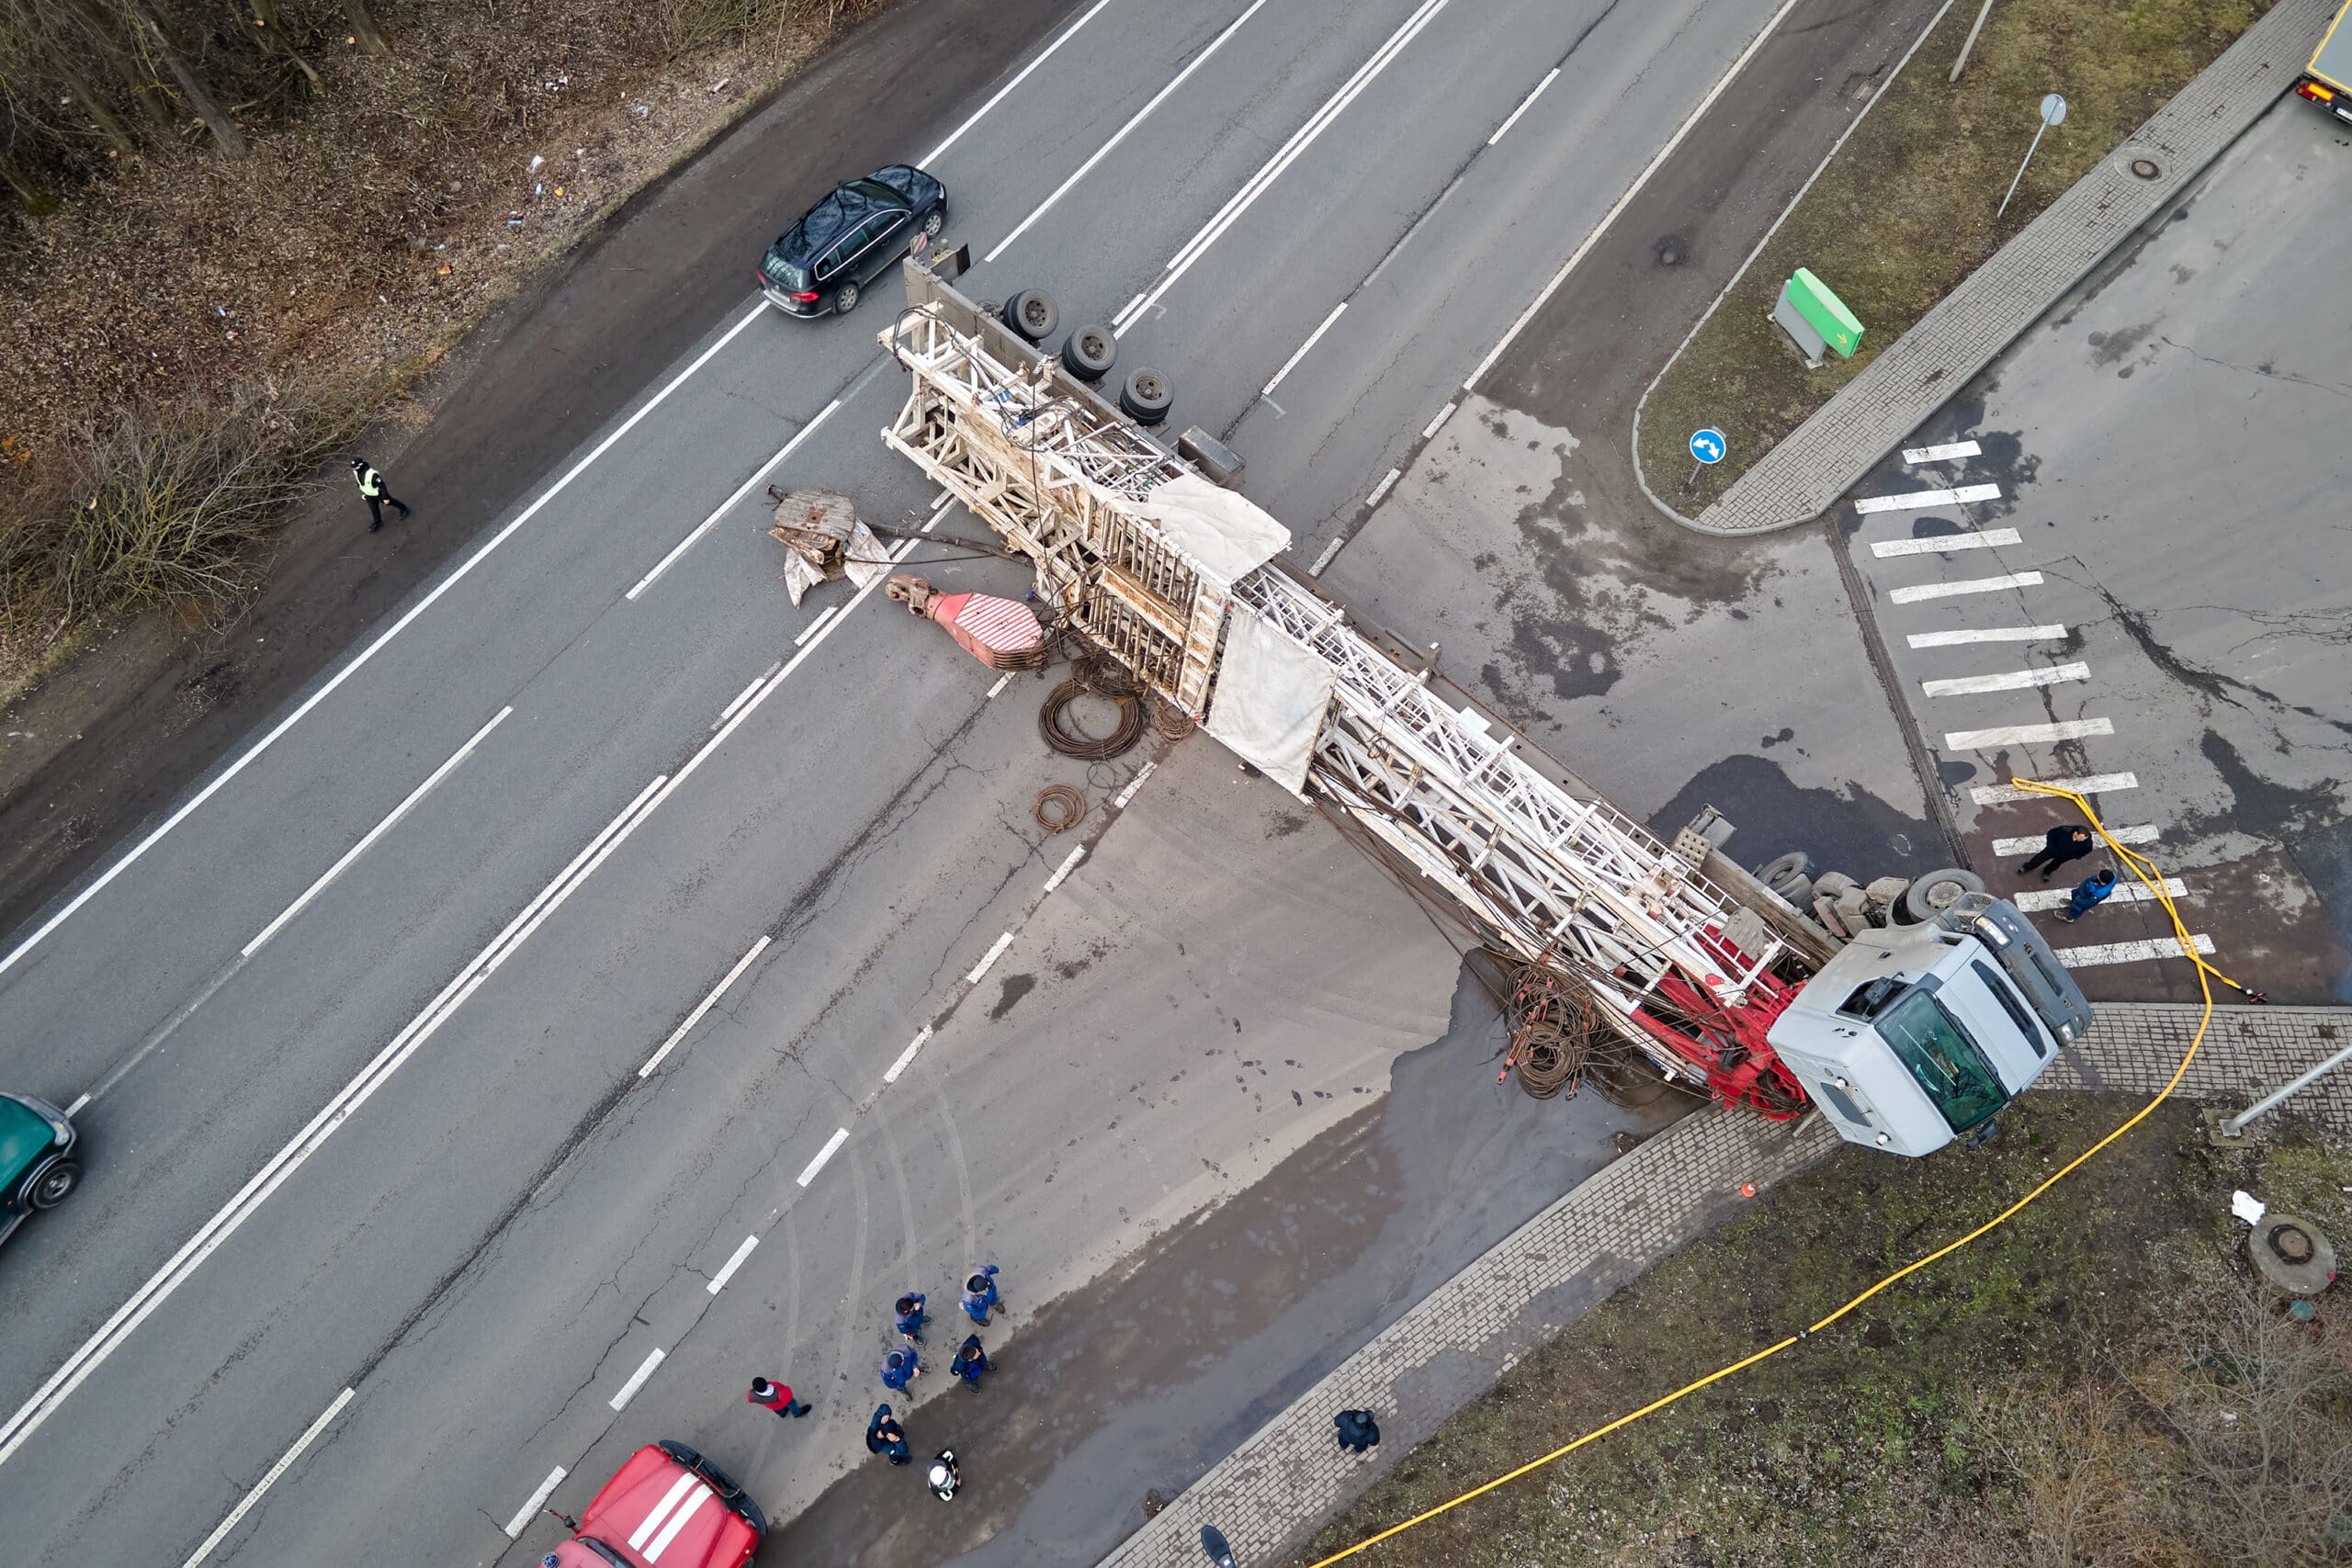 aerial-view-of-road-accident-with-overturned-truck-2022-09-12-17-28-42-utc-scaled.jpg